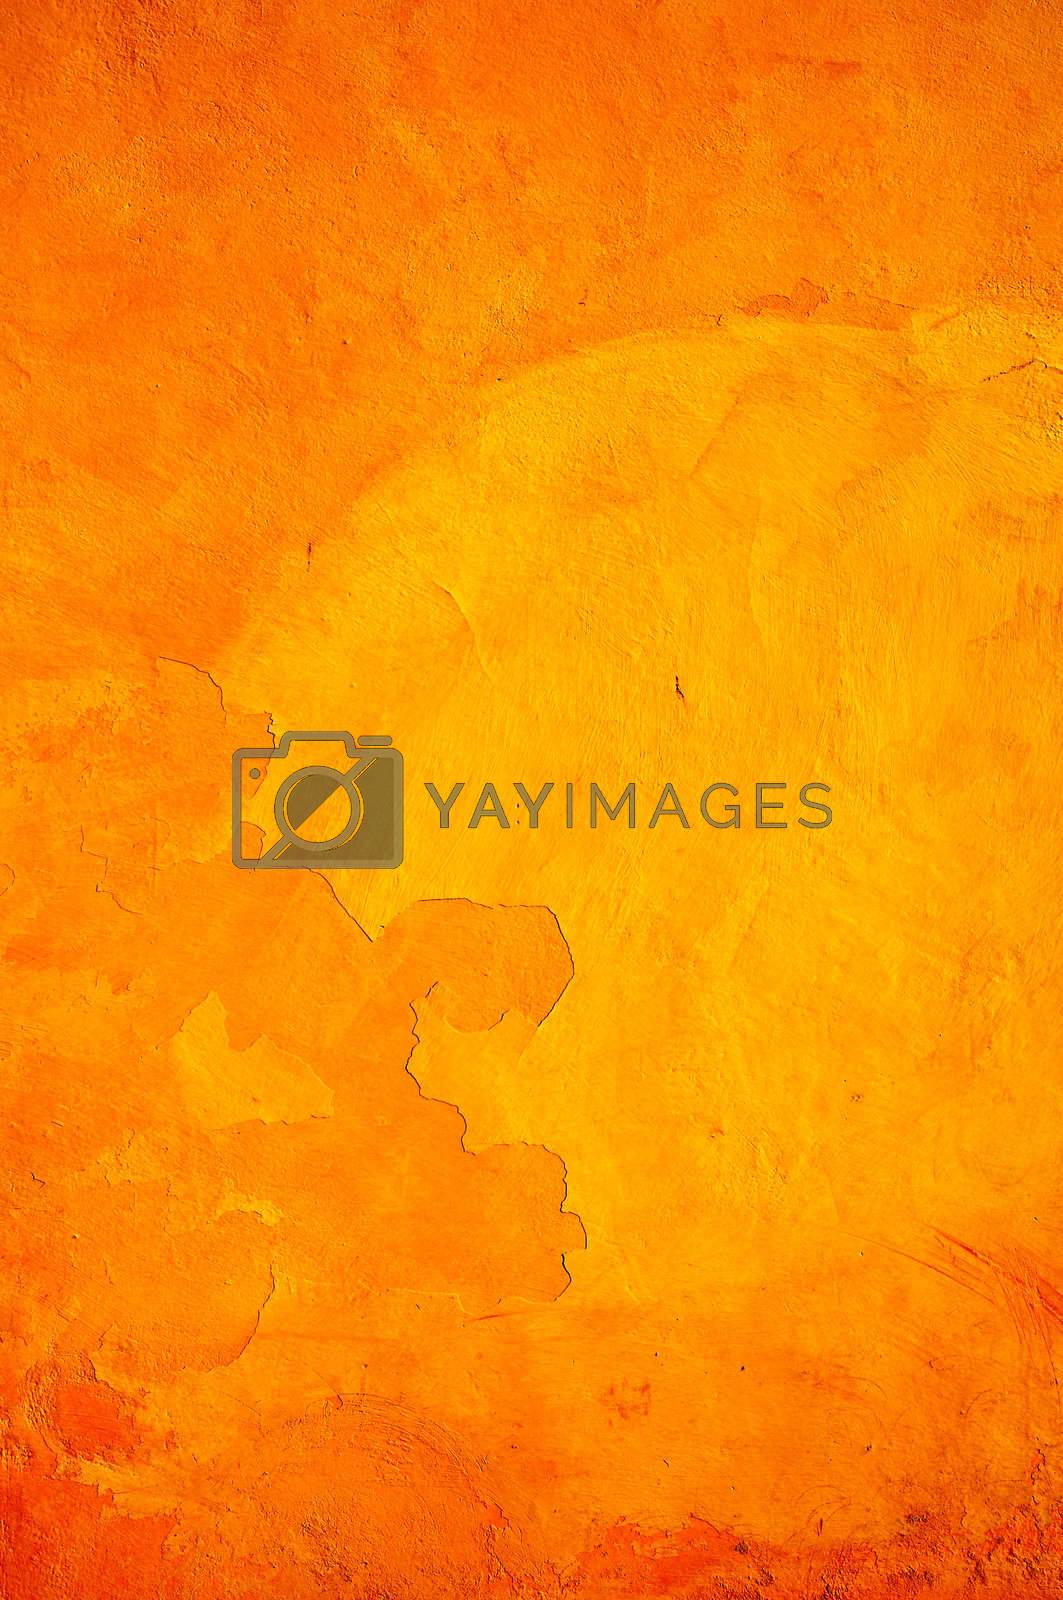 Royalty free image of Orange textured wall by ankihoglund